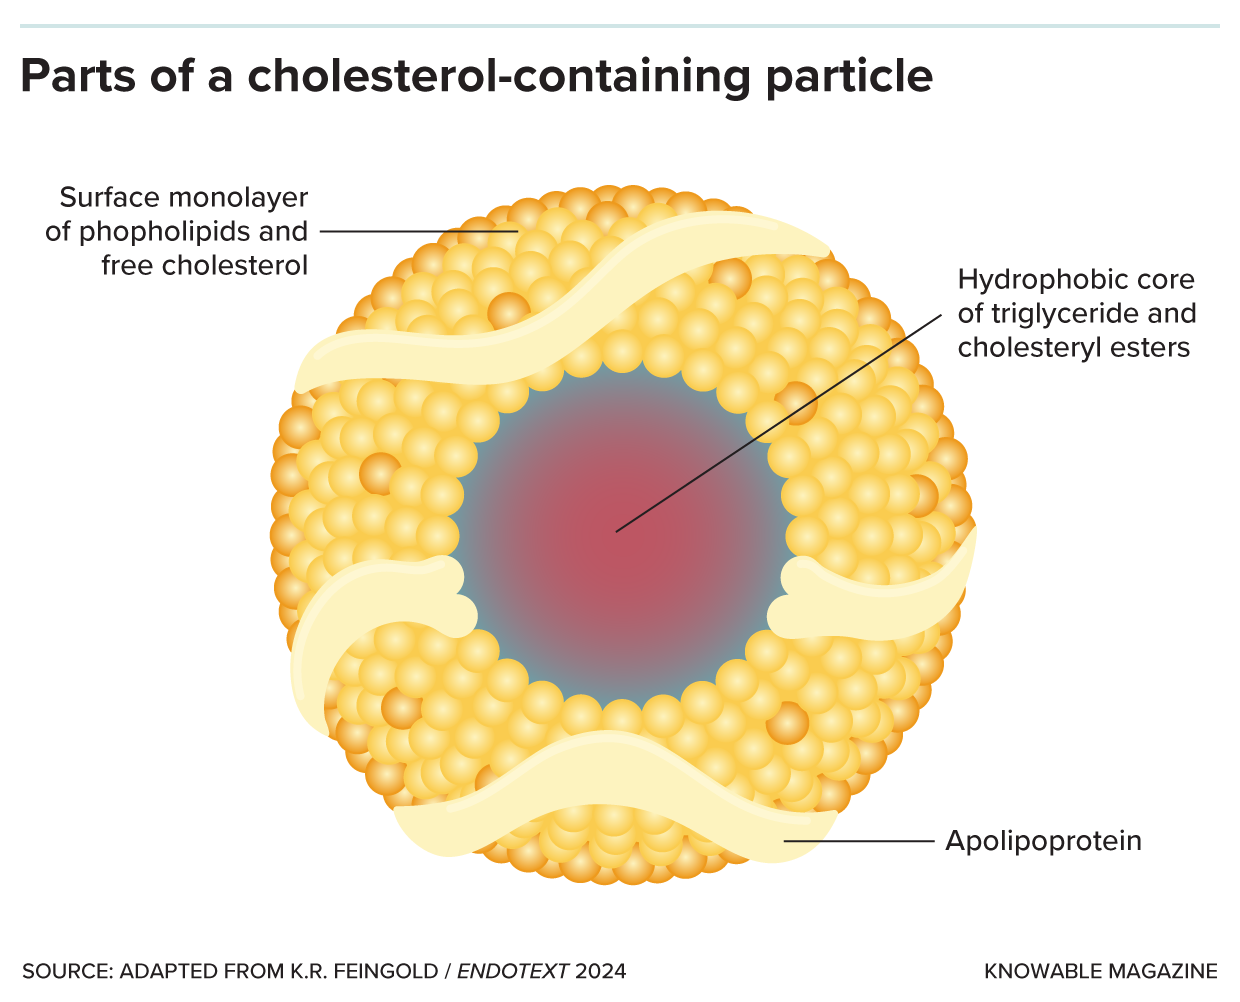 Lipoprotein particles are made up of a core containing fat in the form of triglycerides and cholesterol in the form of cholesteryl esters, surrounded by phospholipids, free cholesterol molecules and apolipoprotein. Credit: Knowable Magazine